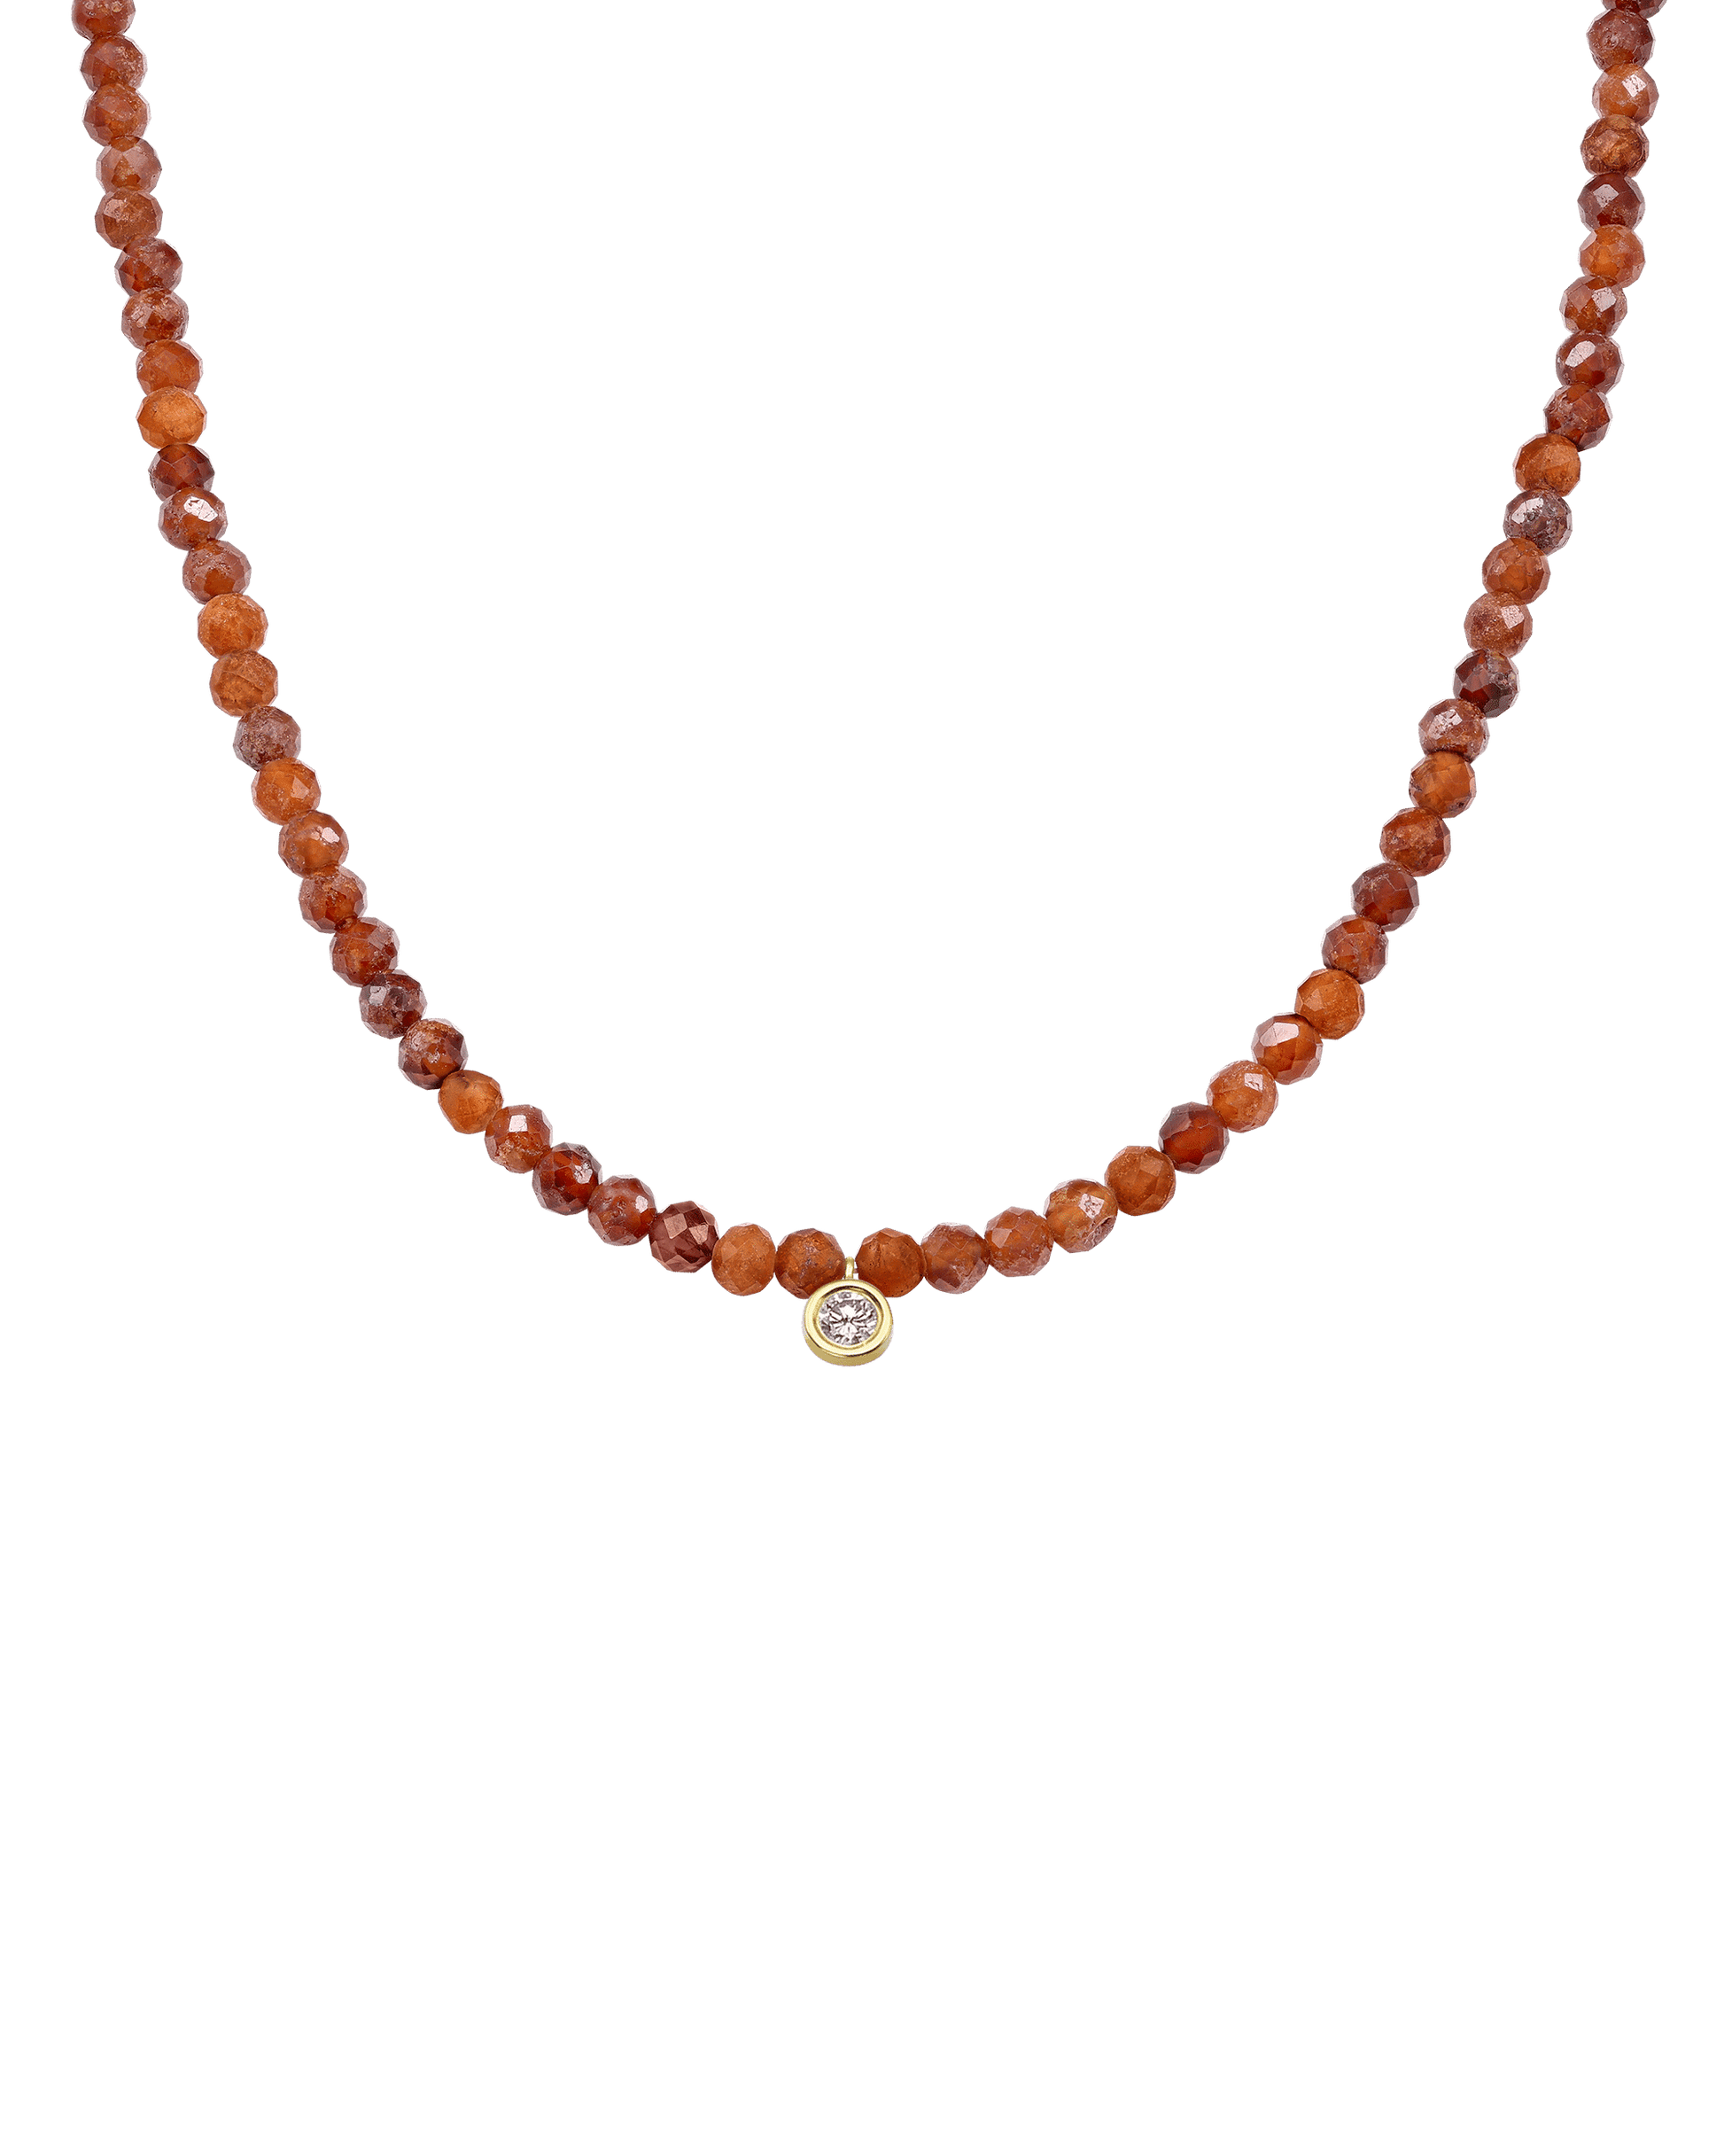 The Gemstone & Diamond Necklace - 14K Yellow Gold Necklaces 14K Solid Gold Natural Garnet Large: 0.1ct 14"